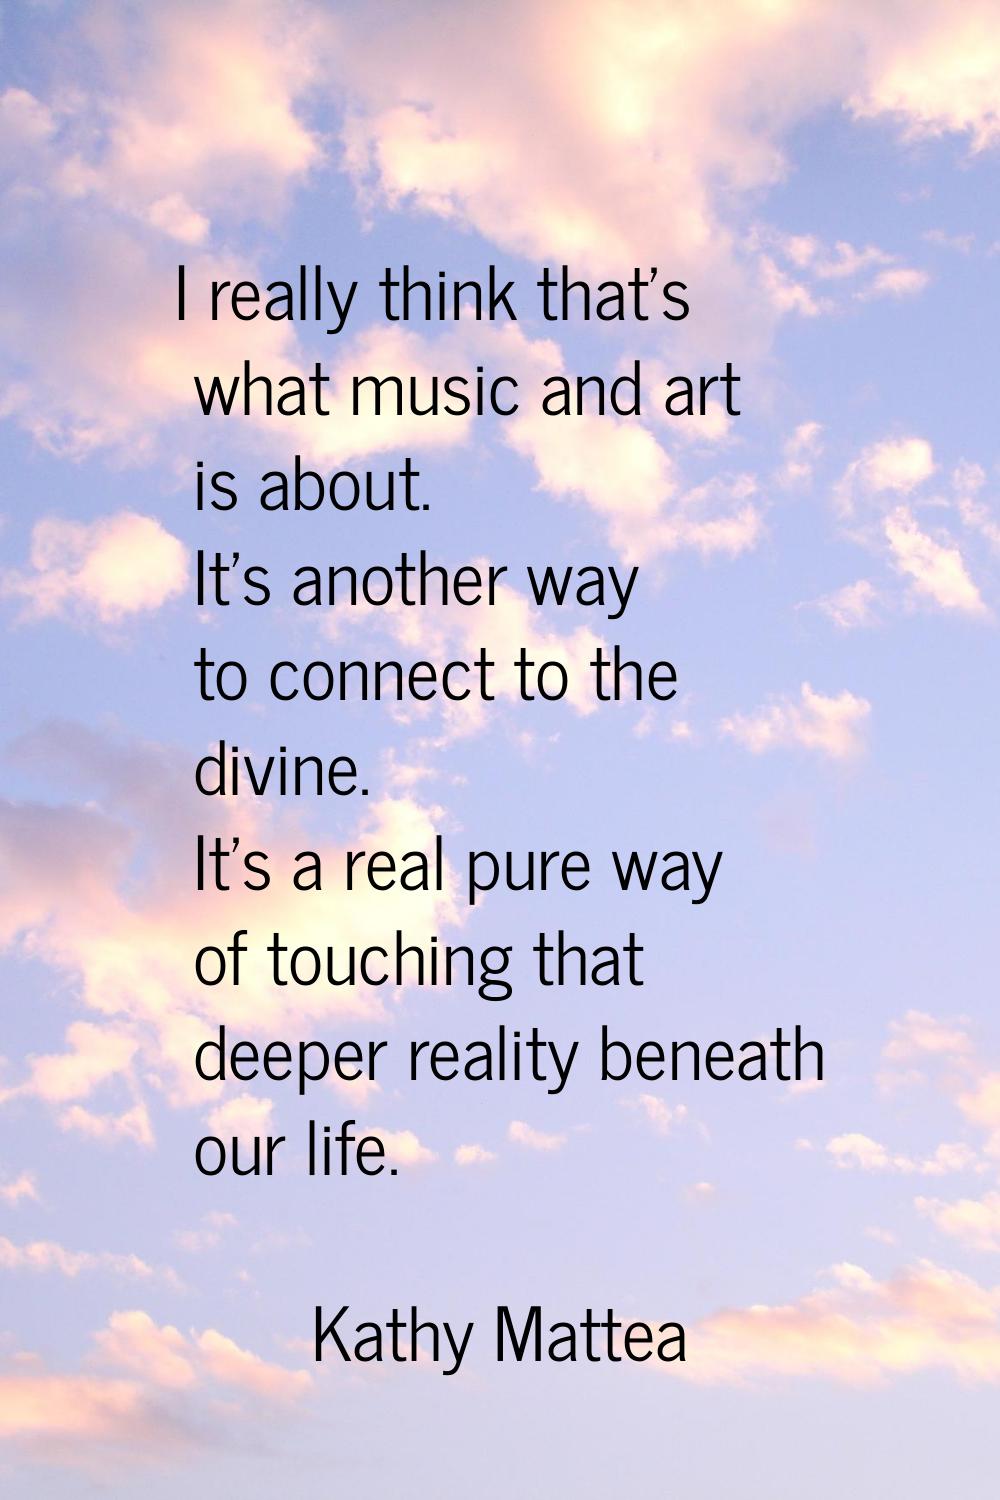 I really think that's what music and art is about. It's another way to connect to the divine. It's 